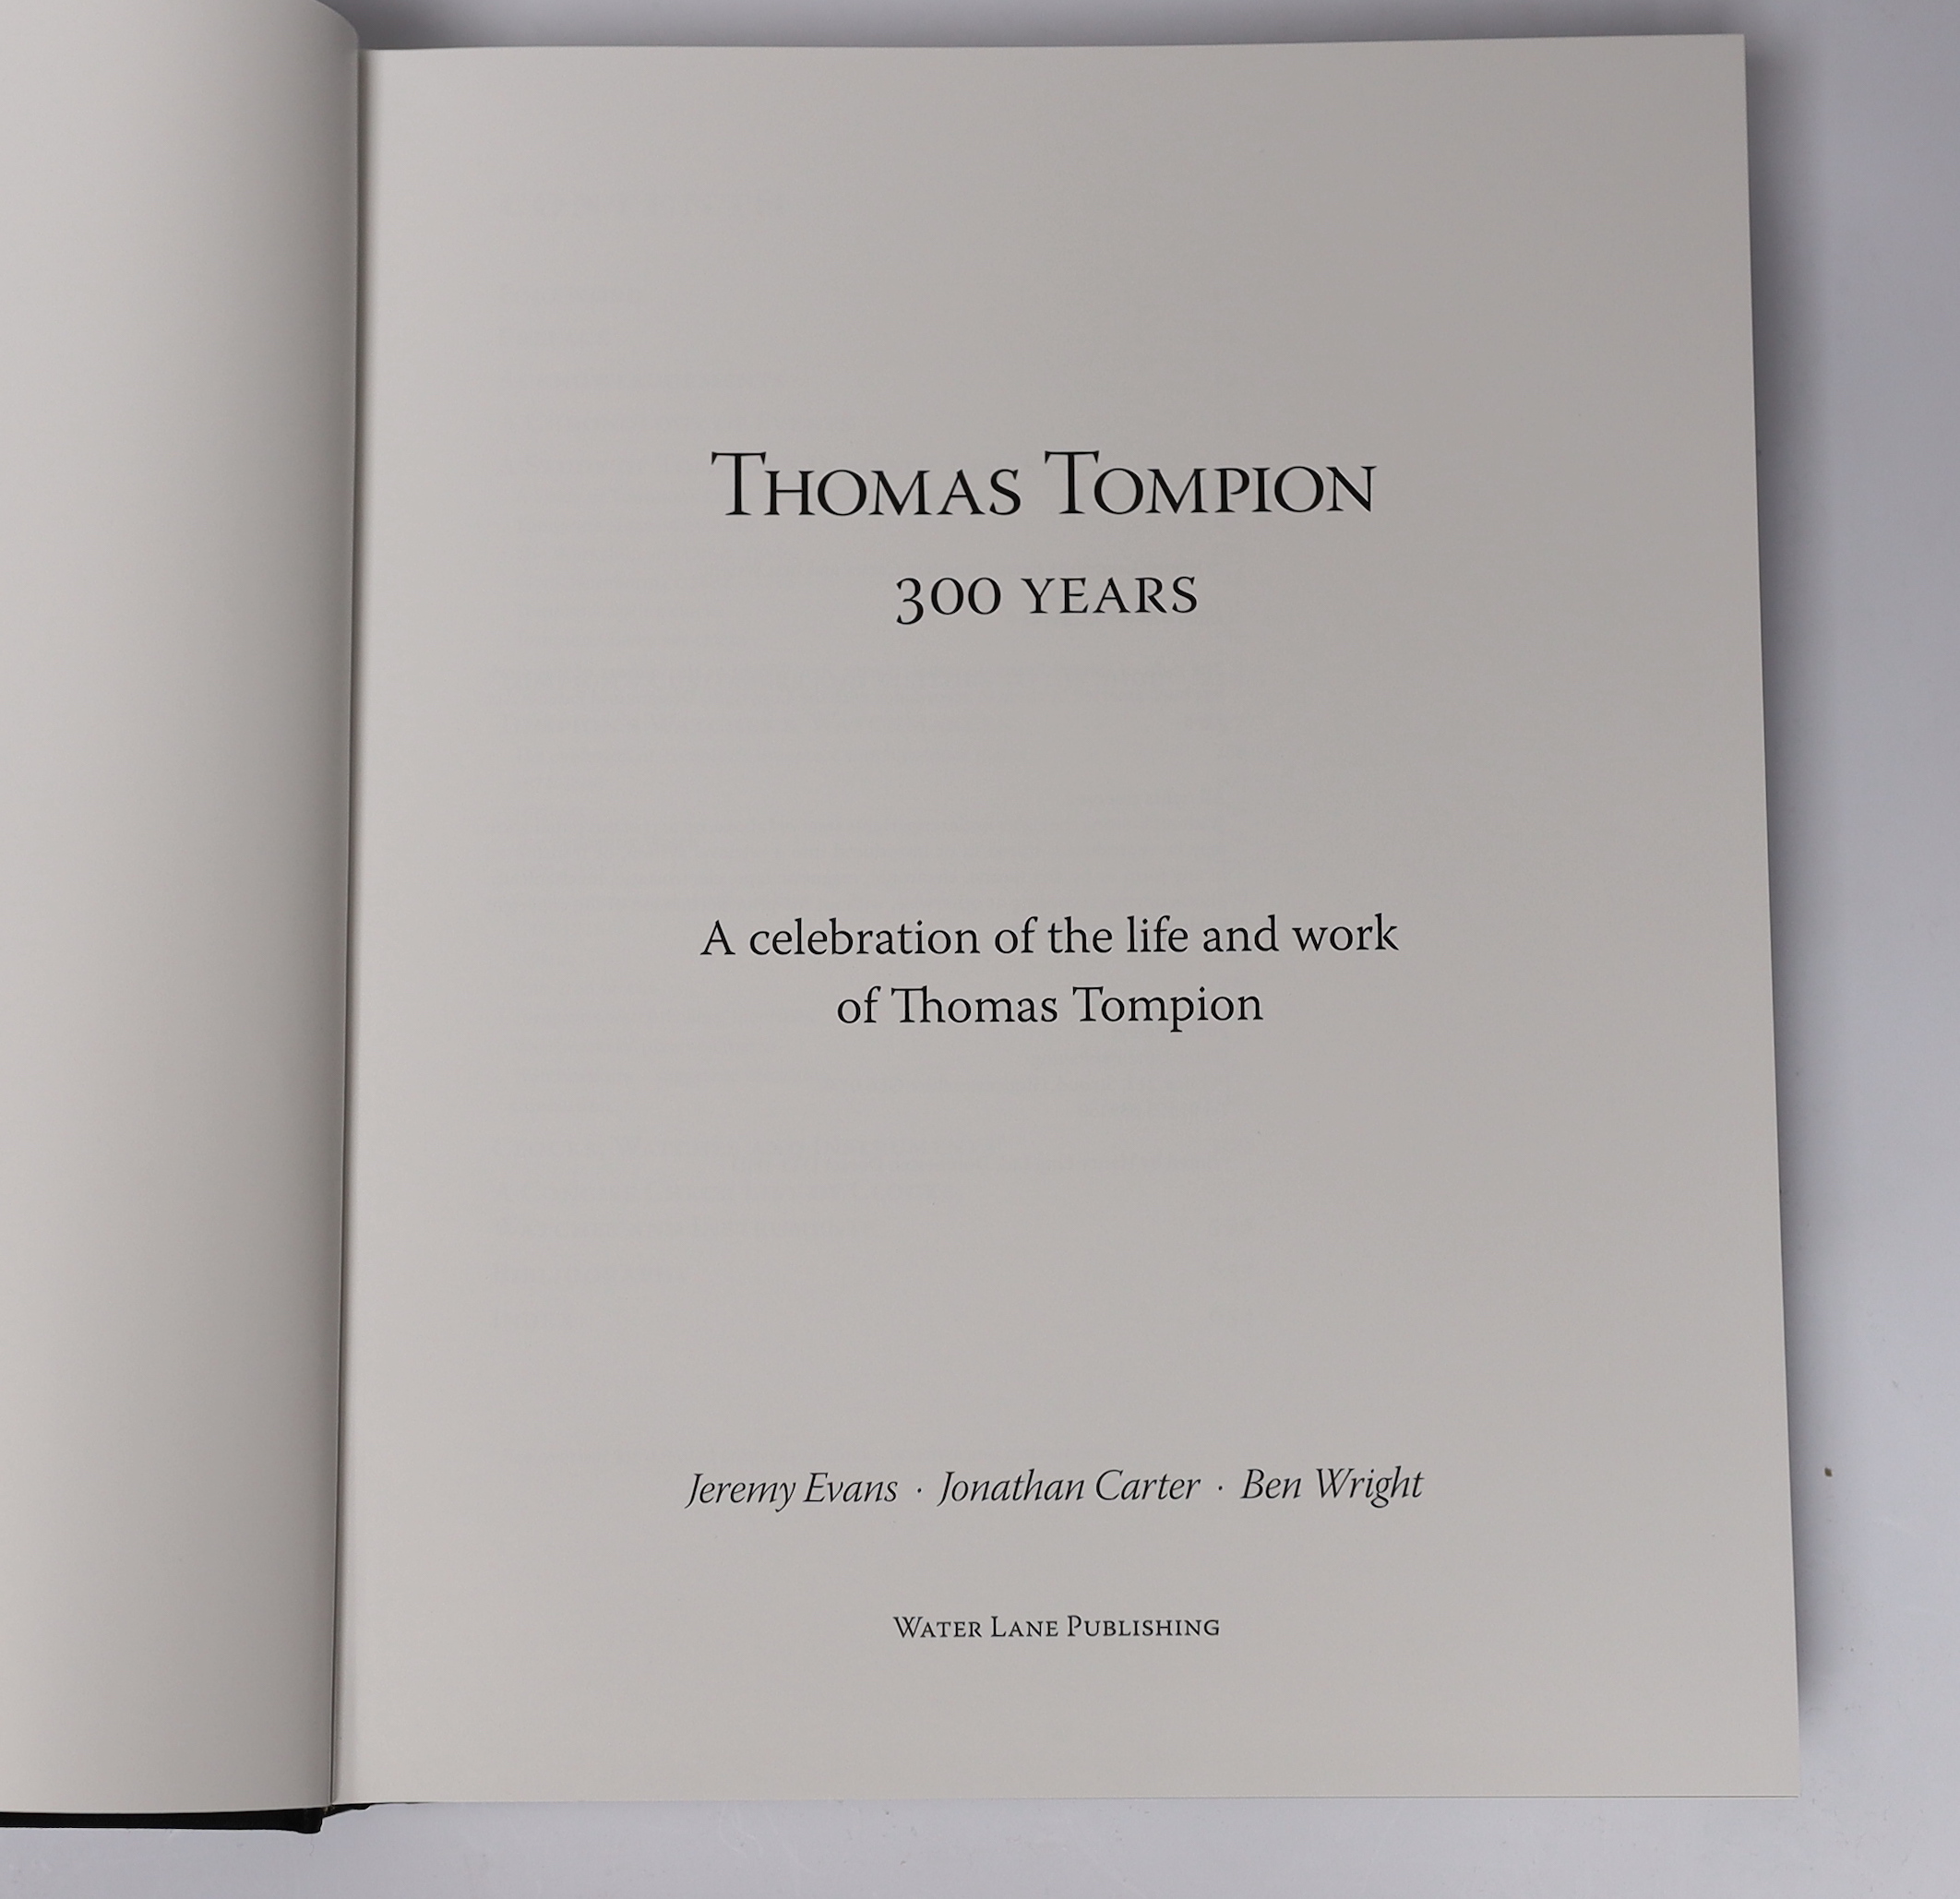 Evans, Jeremy and Others - Thomas Tompion: 300 Years. A celebration of his life and work...Limited Edition. many illus. throughout (mostly coloured, some full page); publisher's gilt lettered buckram and d/wrapper, picto